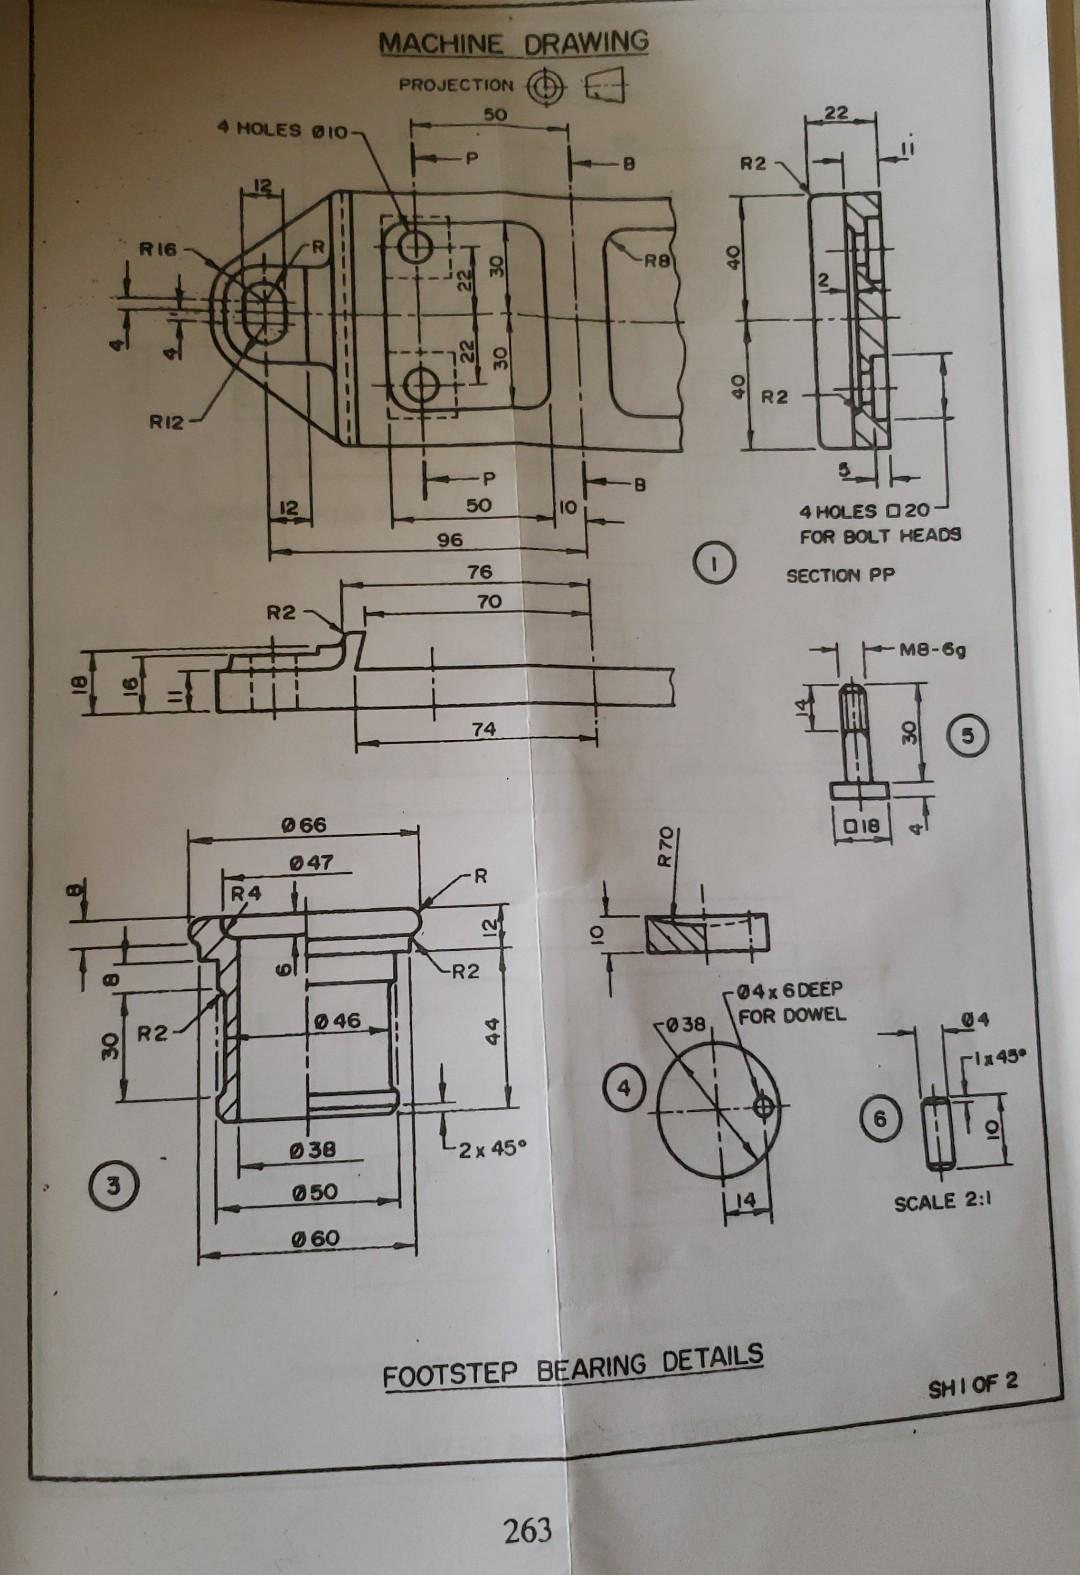 Aggregate more than 56 foot step bearing assembly drawing